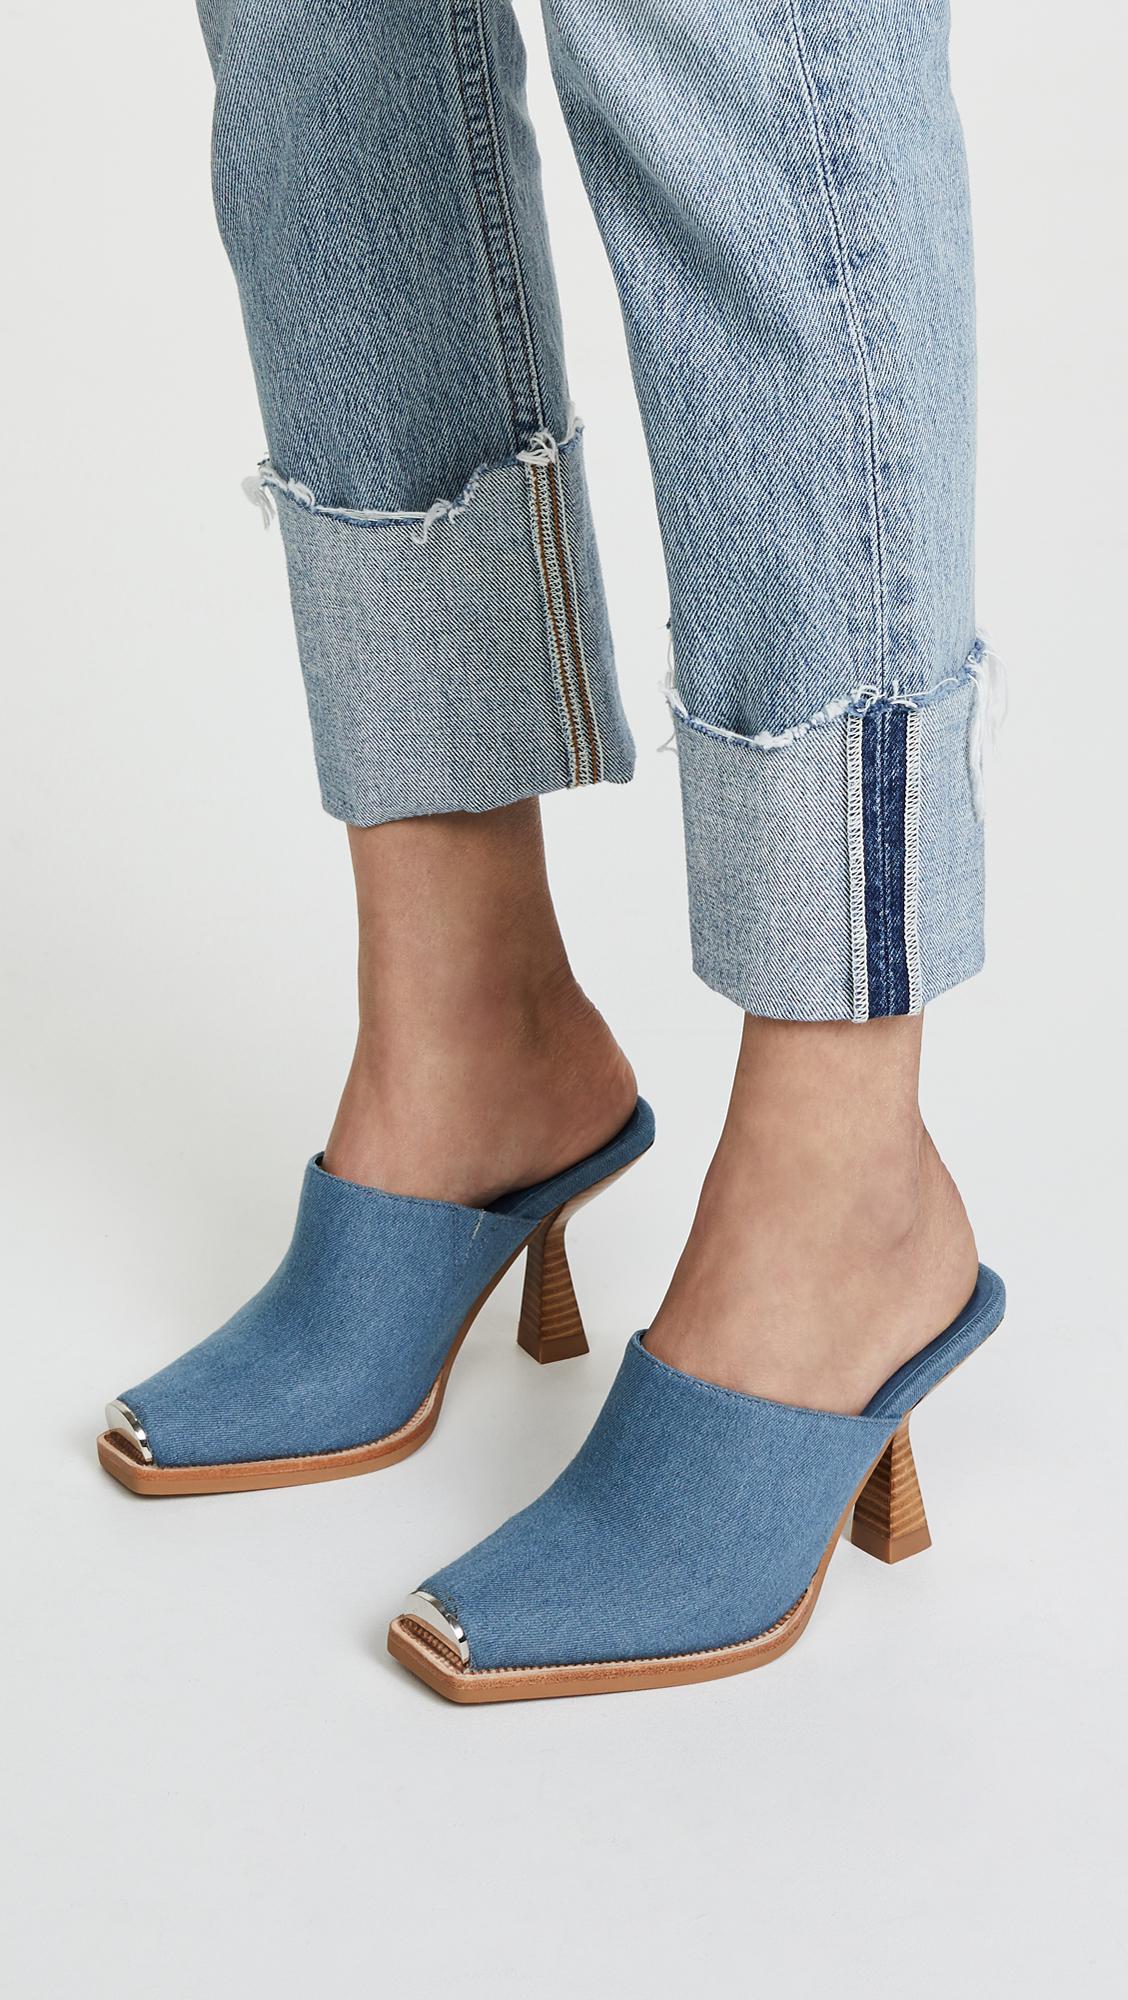 Lyst - Jeffrey Campbell Real Mules in Blue